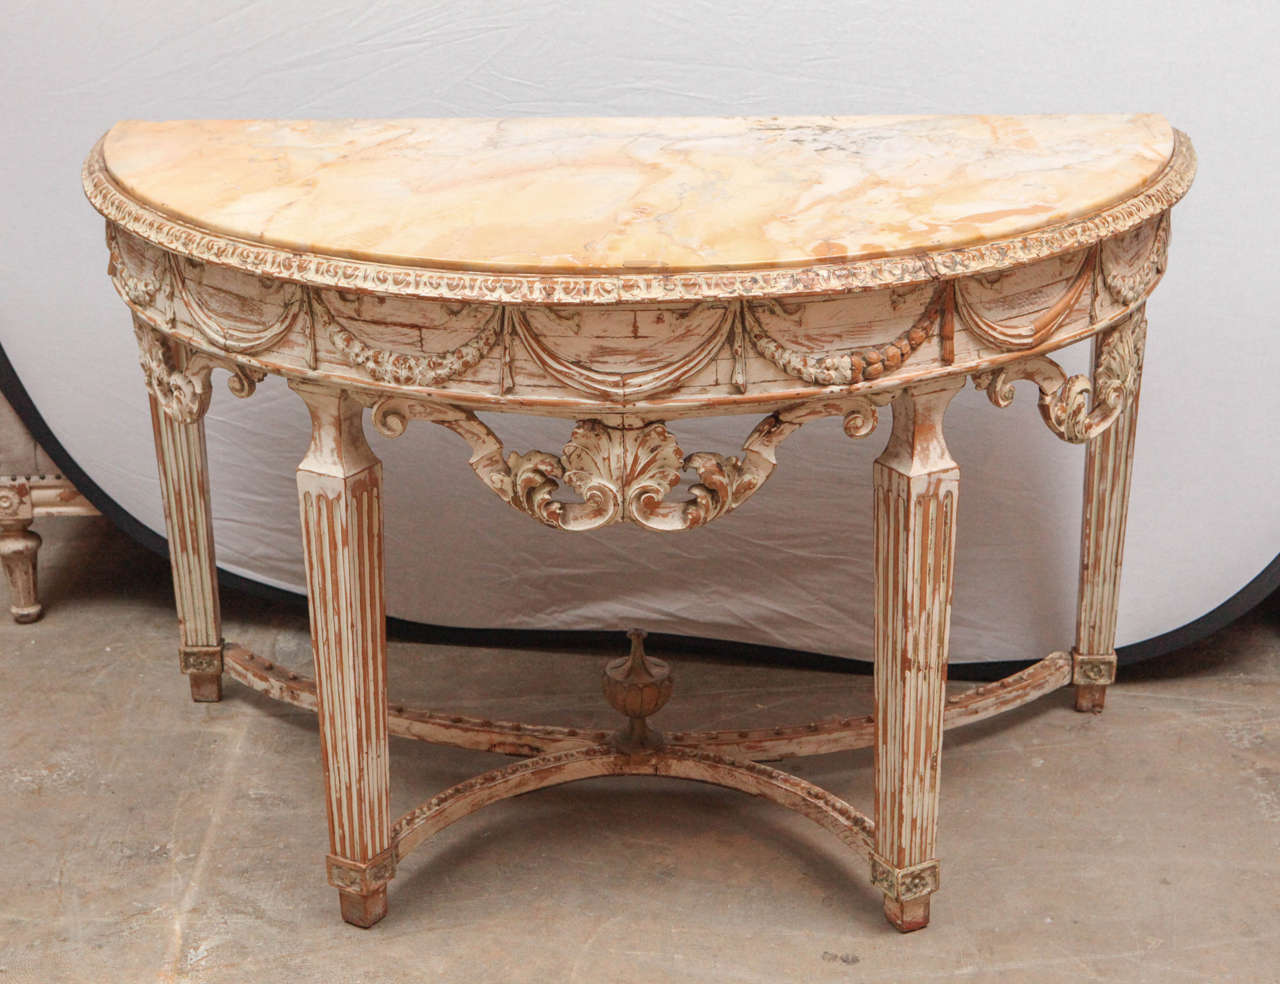 19th Century Italian Carved Demilune Console Table with Stretcher In Good Condition For Sale In Los Angeles, CA